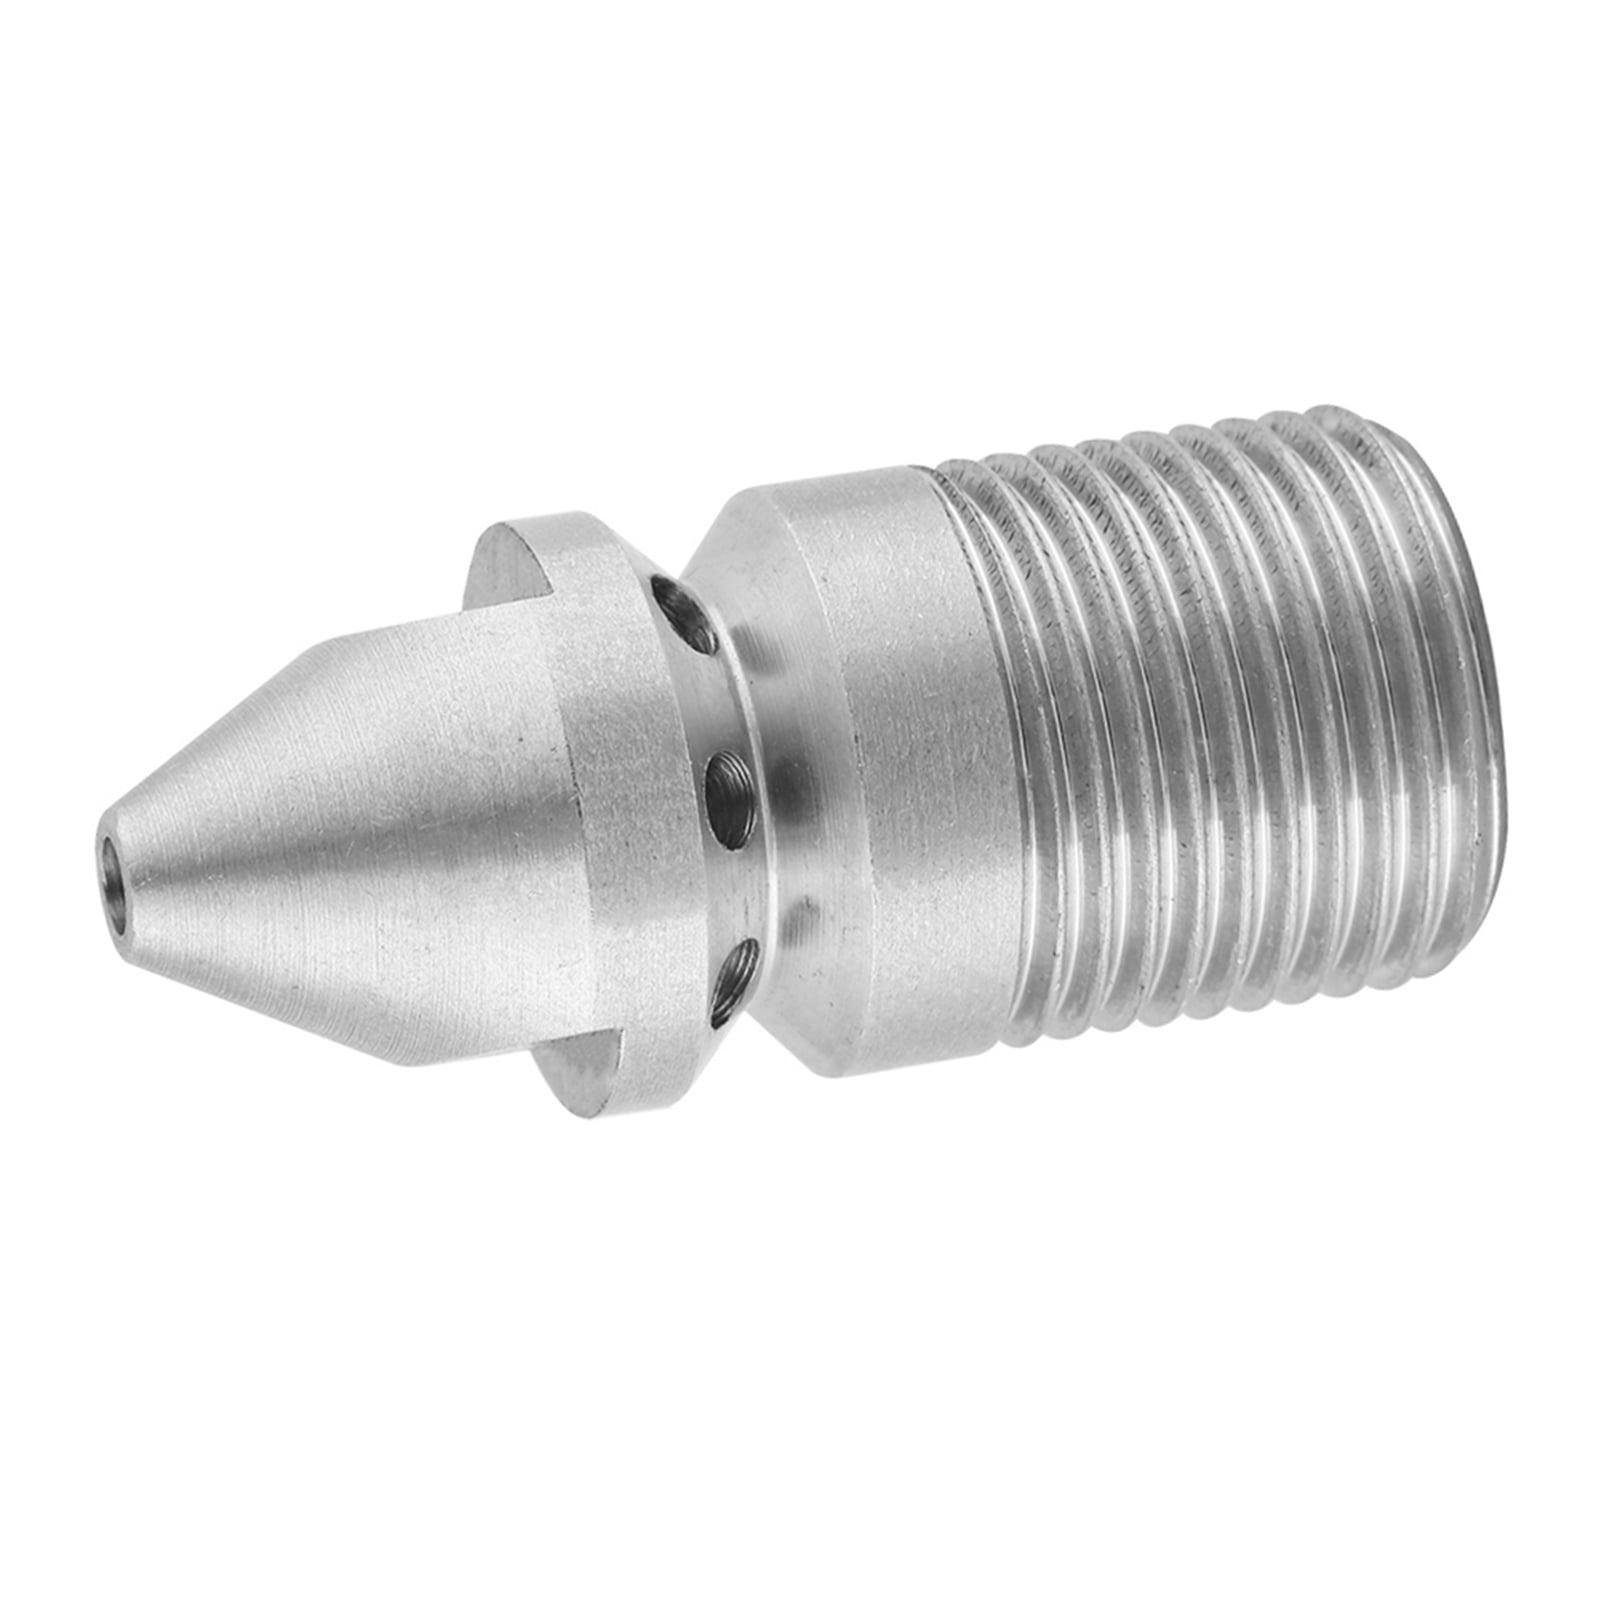 Pressure Washer Stainless Steel Nozzle 1/4" 5er Pack 40 ° Size 2-10 